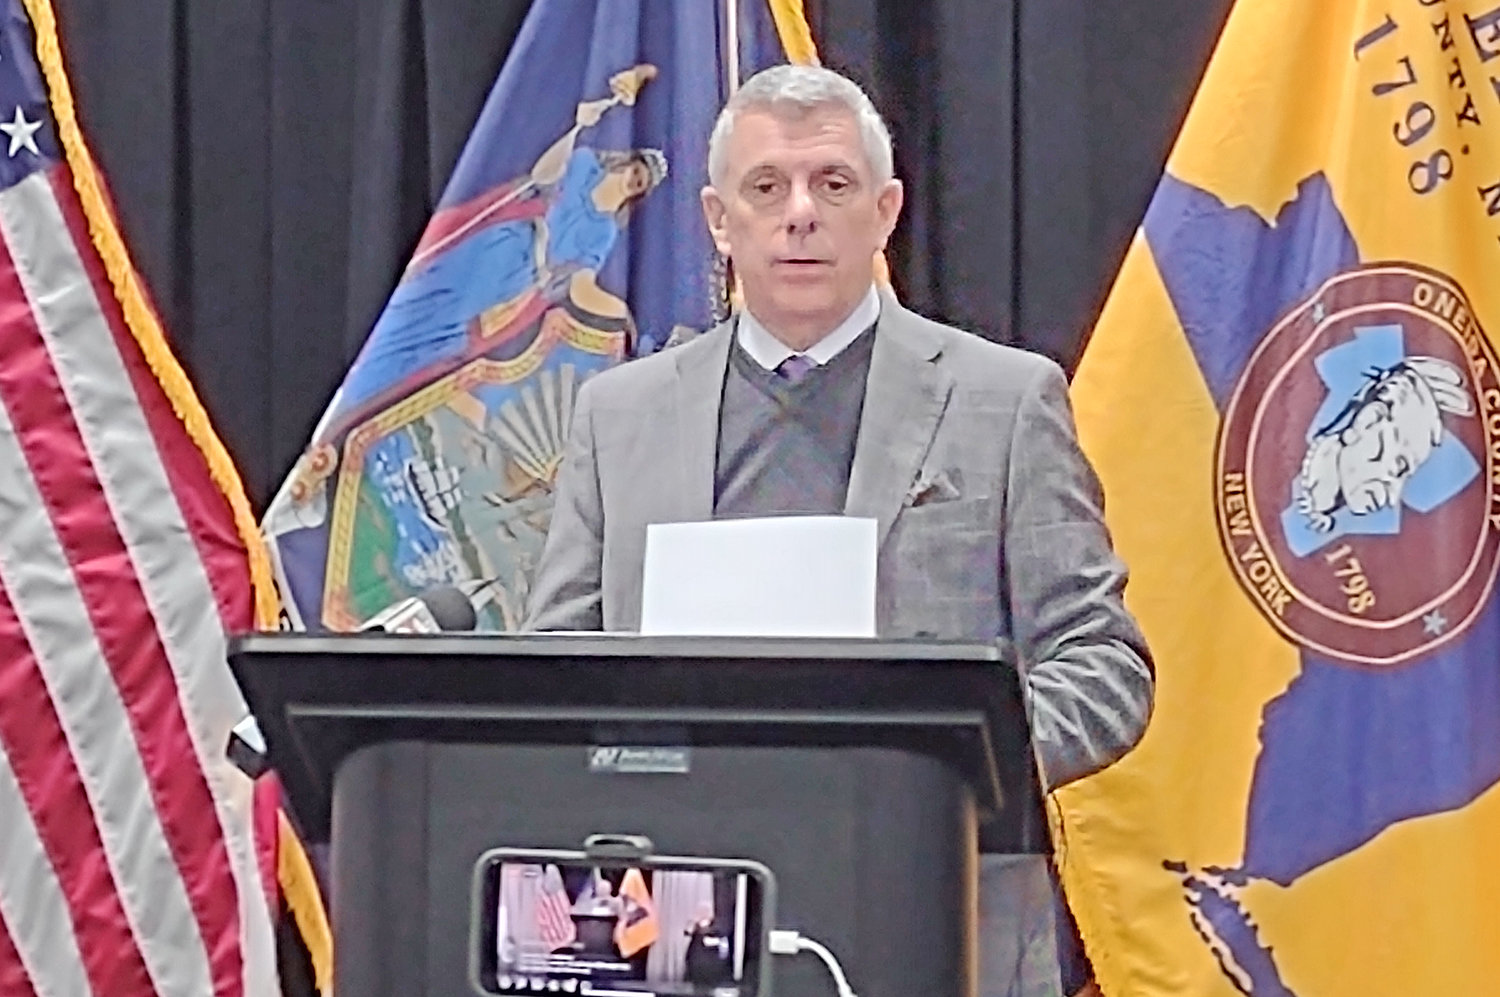 COVID-19 UPDATE — On Thursday, Oneida County Executive Anthony J. Picente Jr. gave an update on the state of COVID-19 in Oneida County.